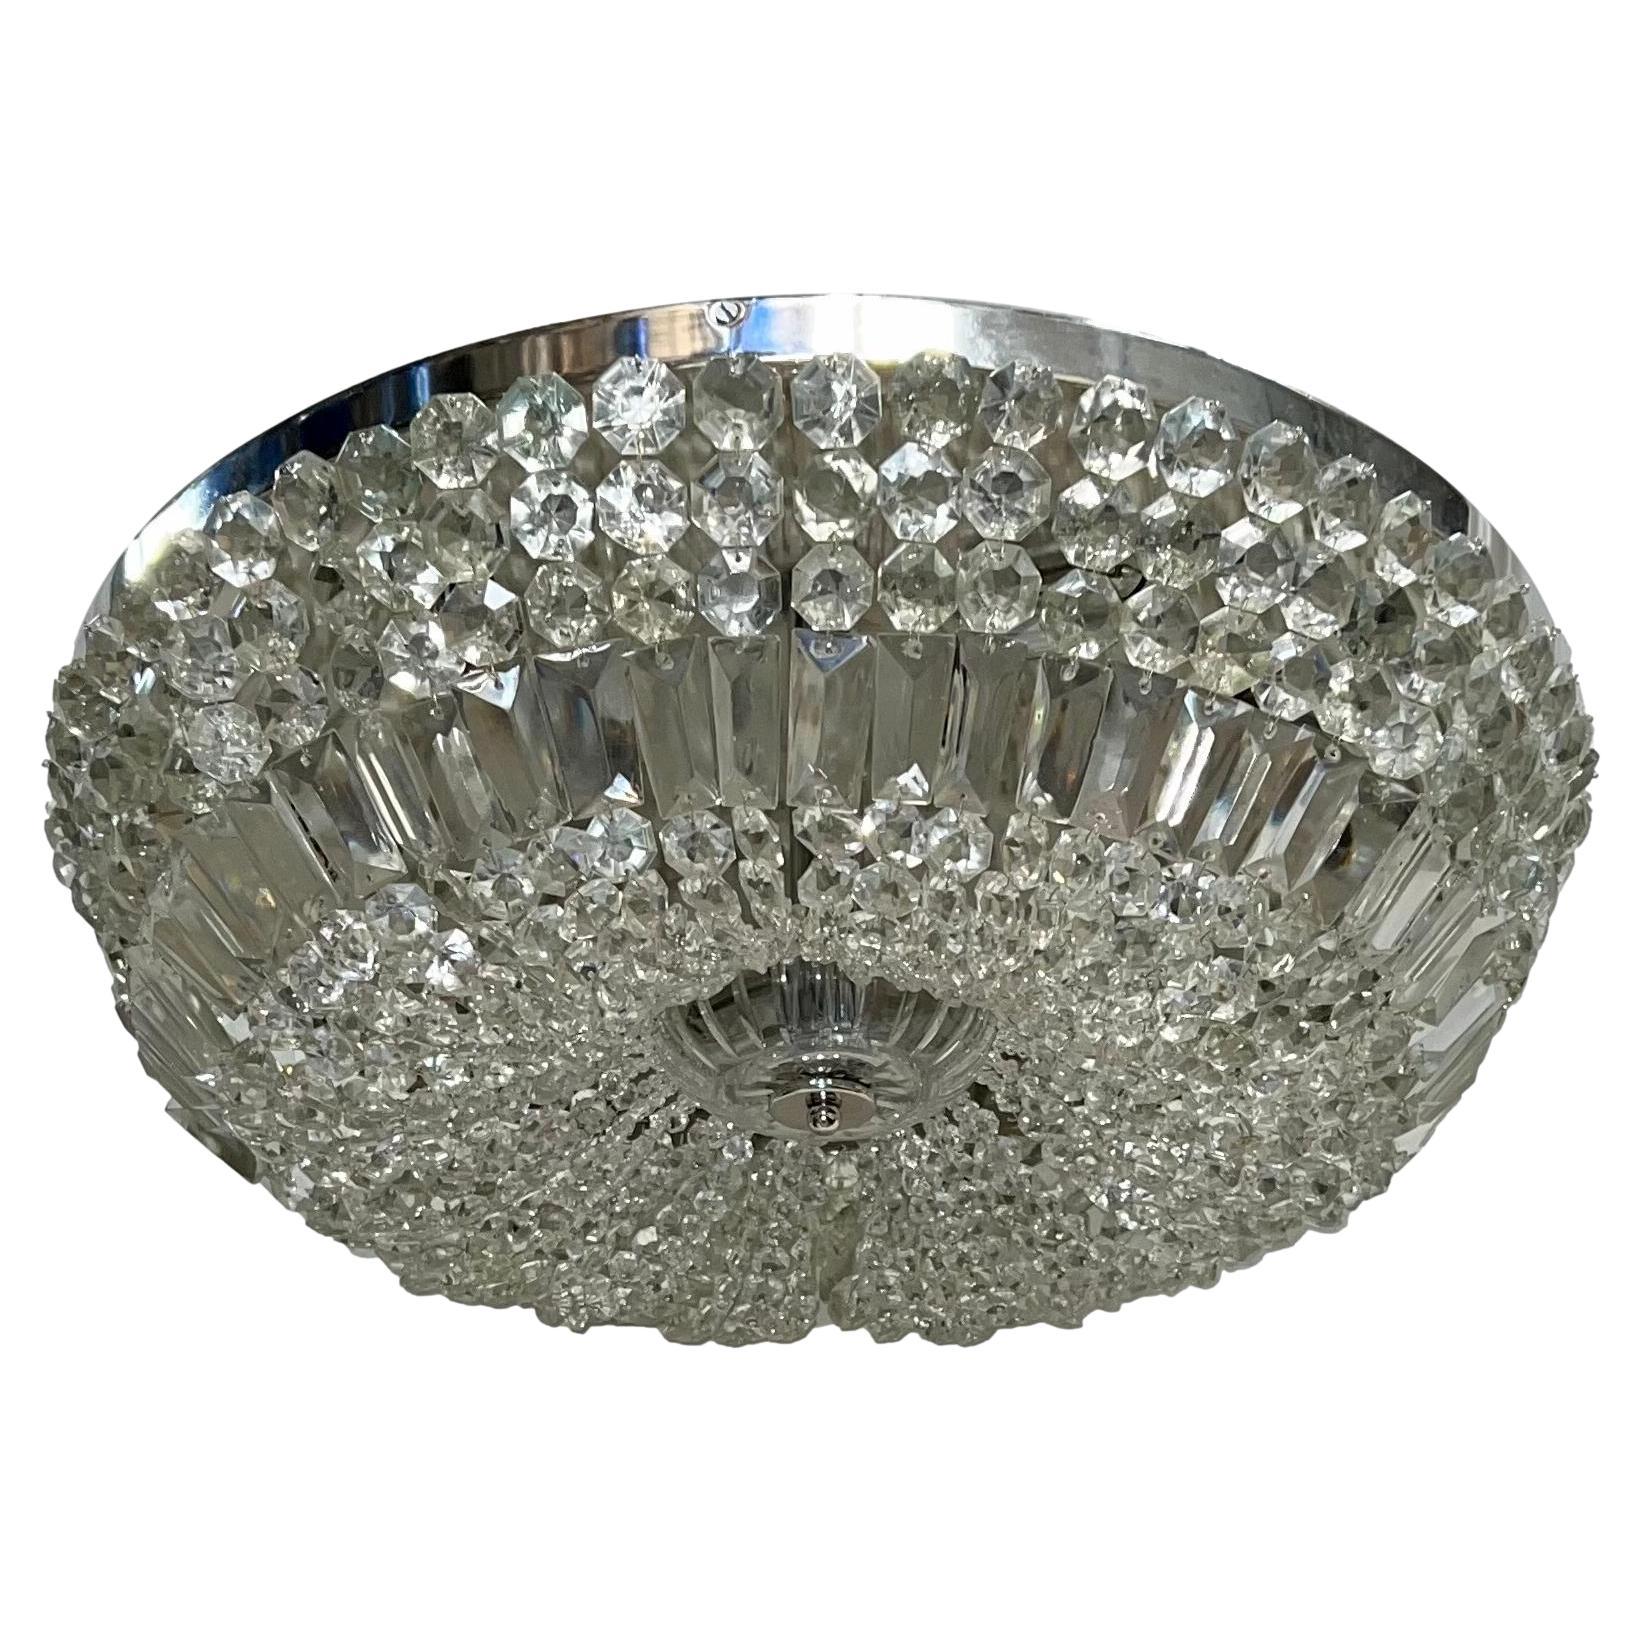 Set of Crystal Flush Fixtures, Sold Individually